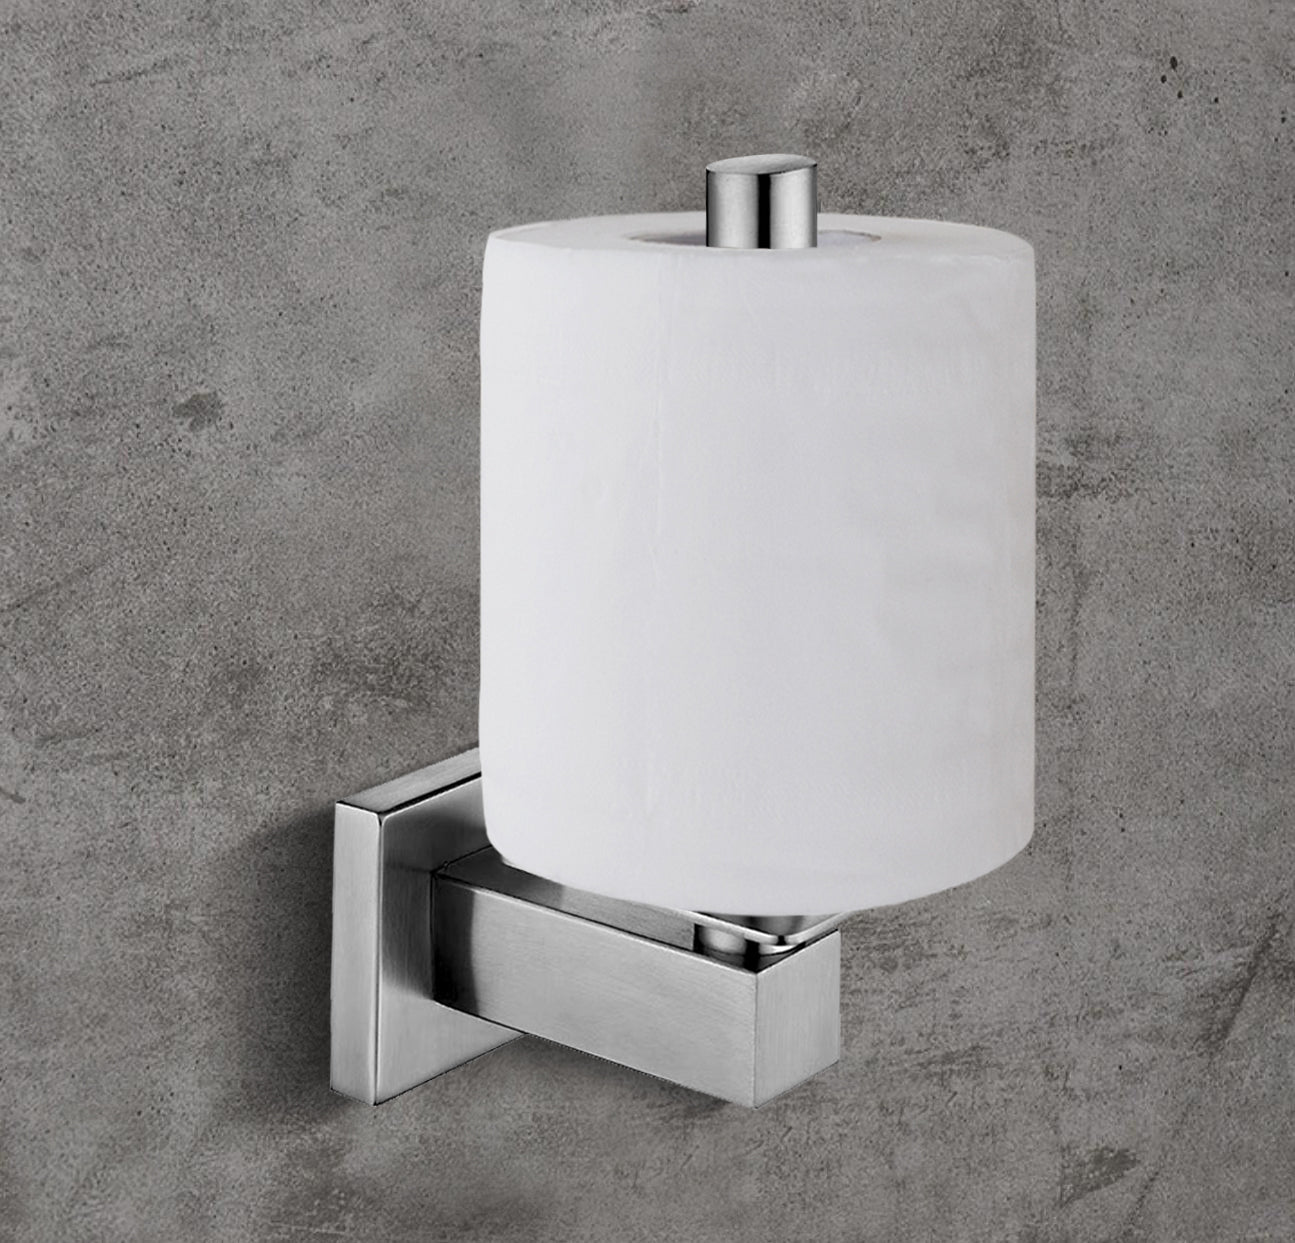 TocTen Toilet Paper Holder-Bathroom Tissue Holder Fit Big Roll Paper,  Toilet Paper Roll Holder Wall Mounted Made of Thicken 304 Stainless Steel